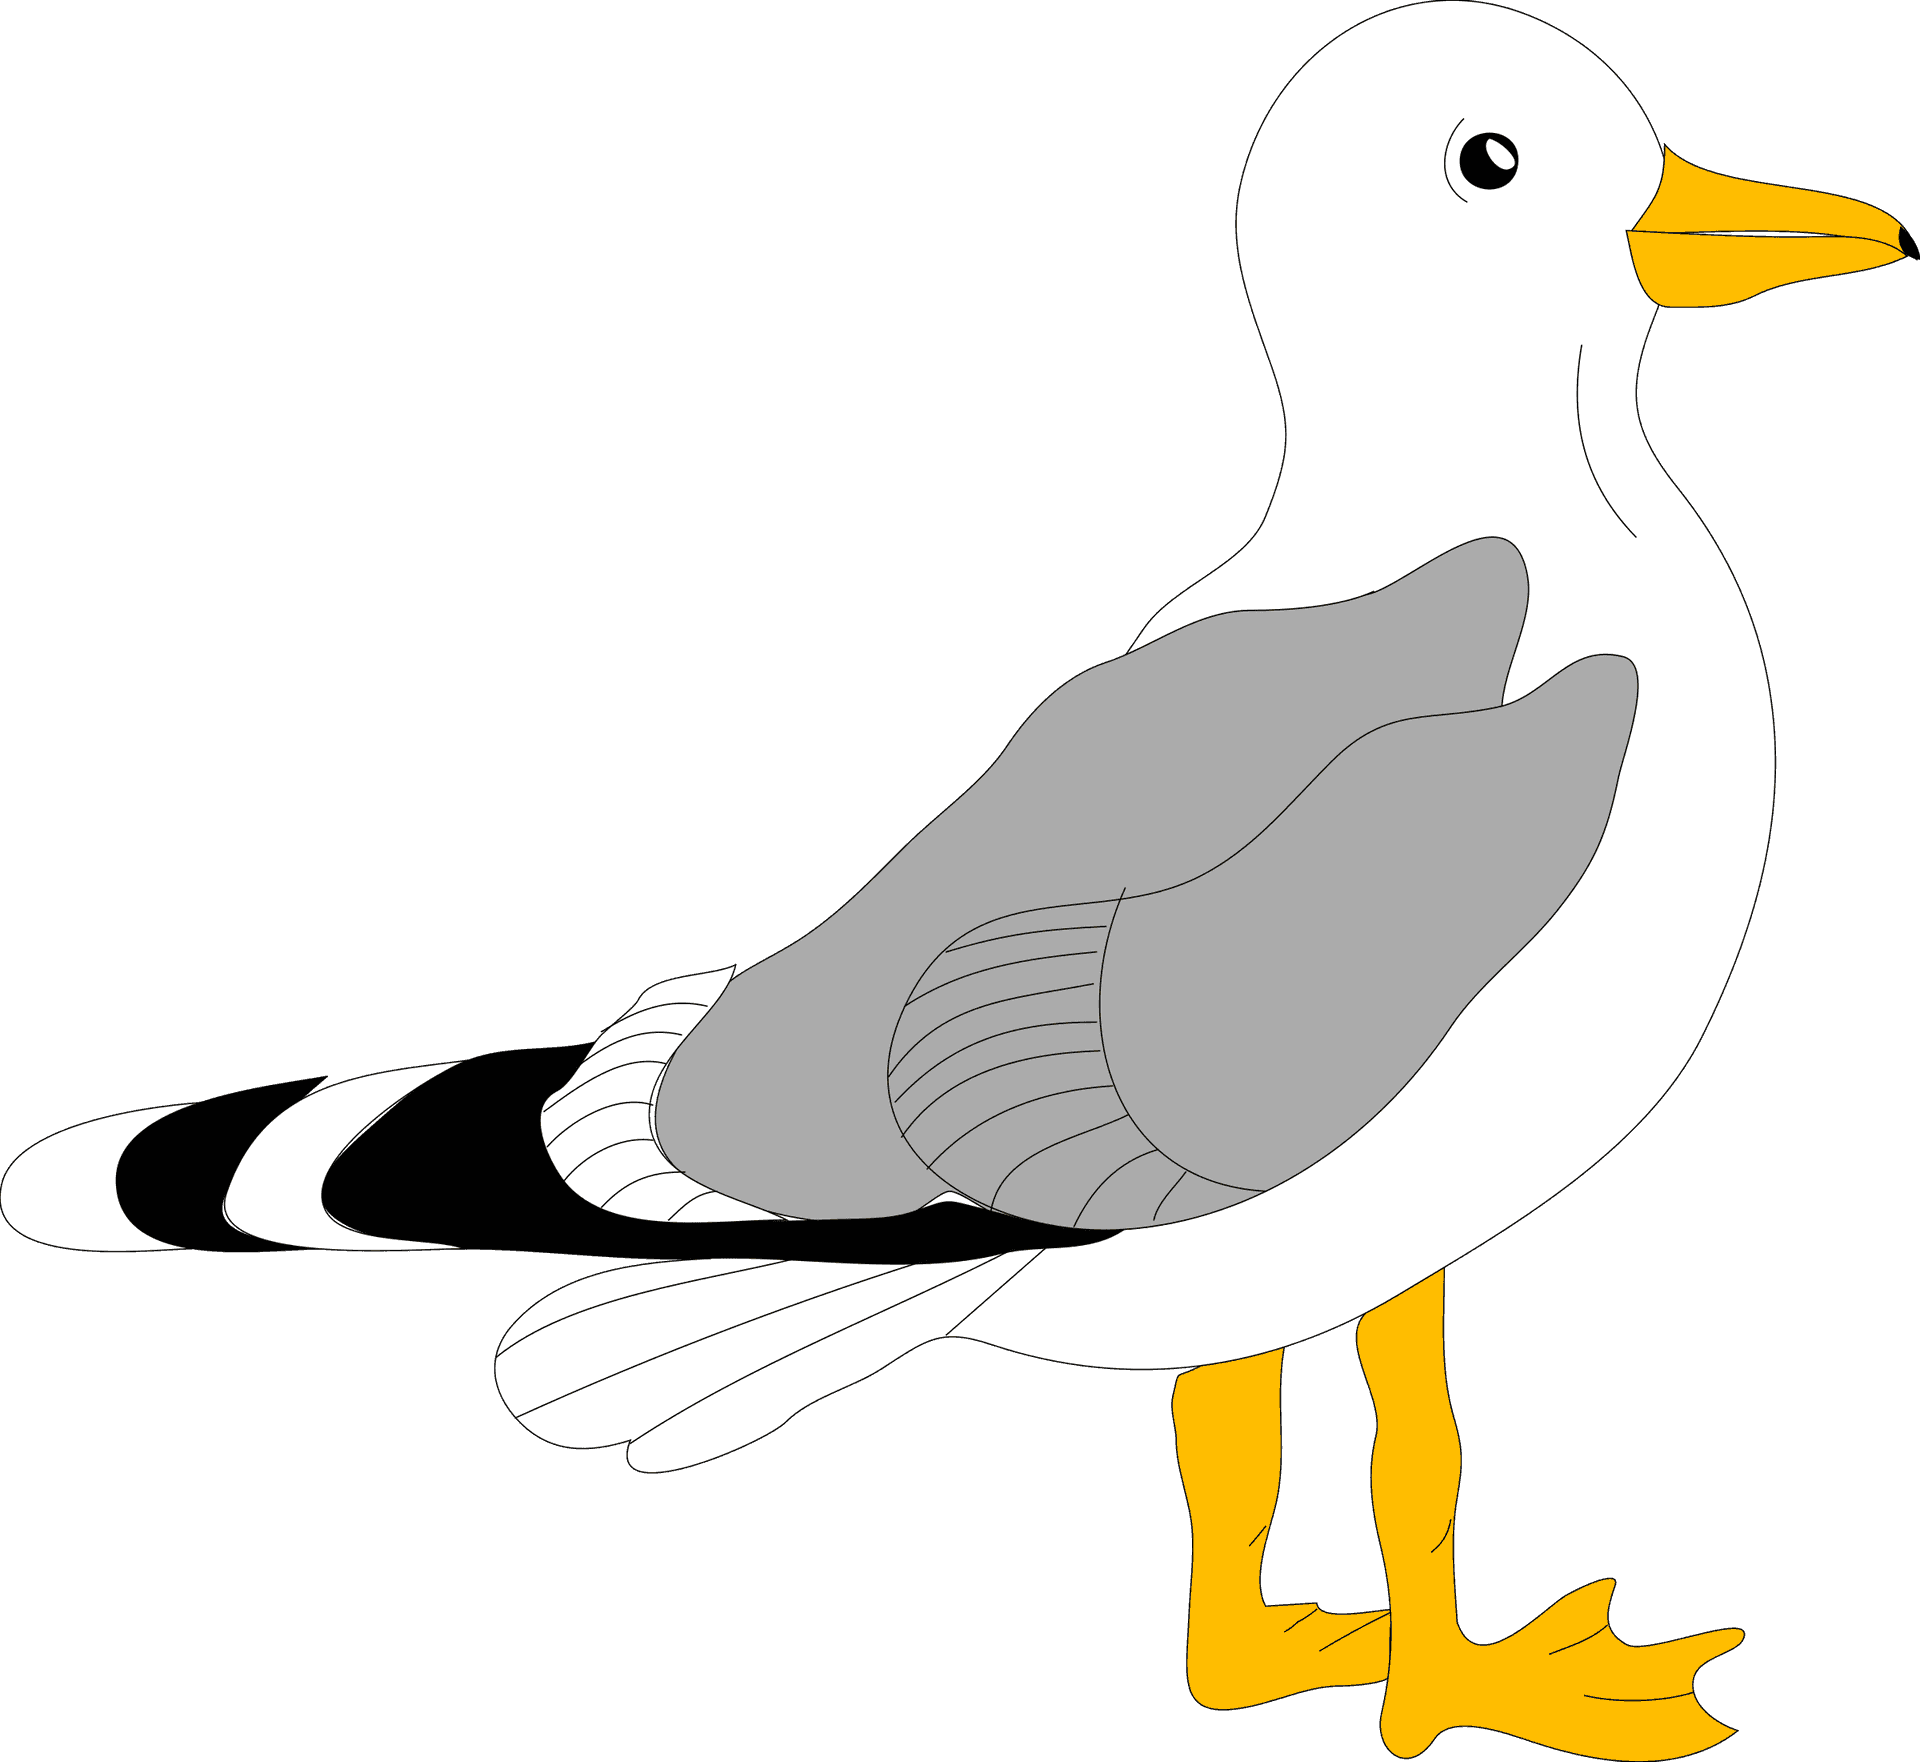 Seagull Illustration Graphic PNG image